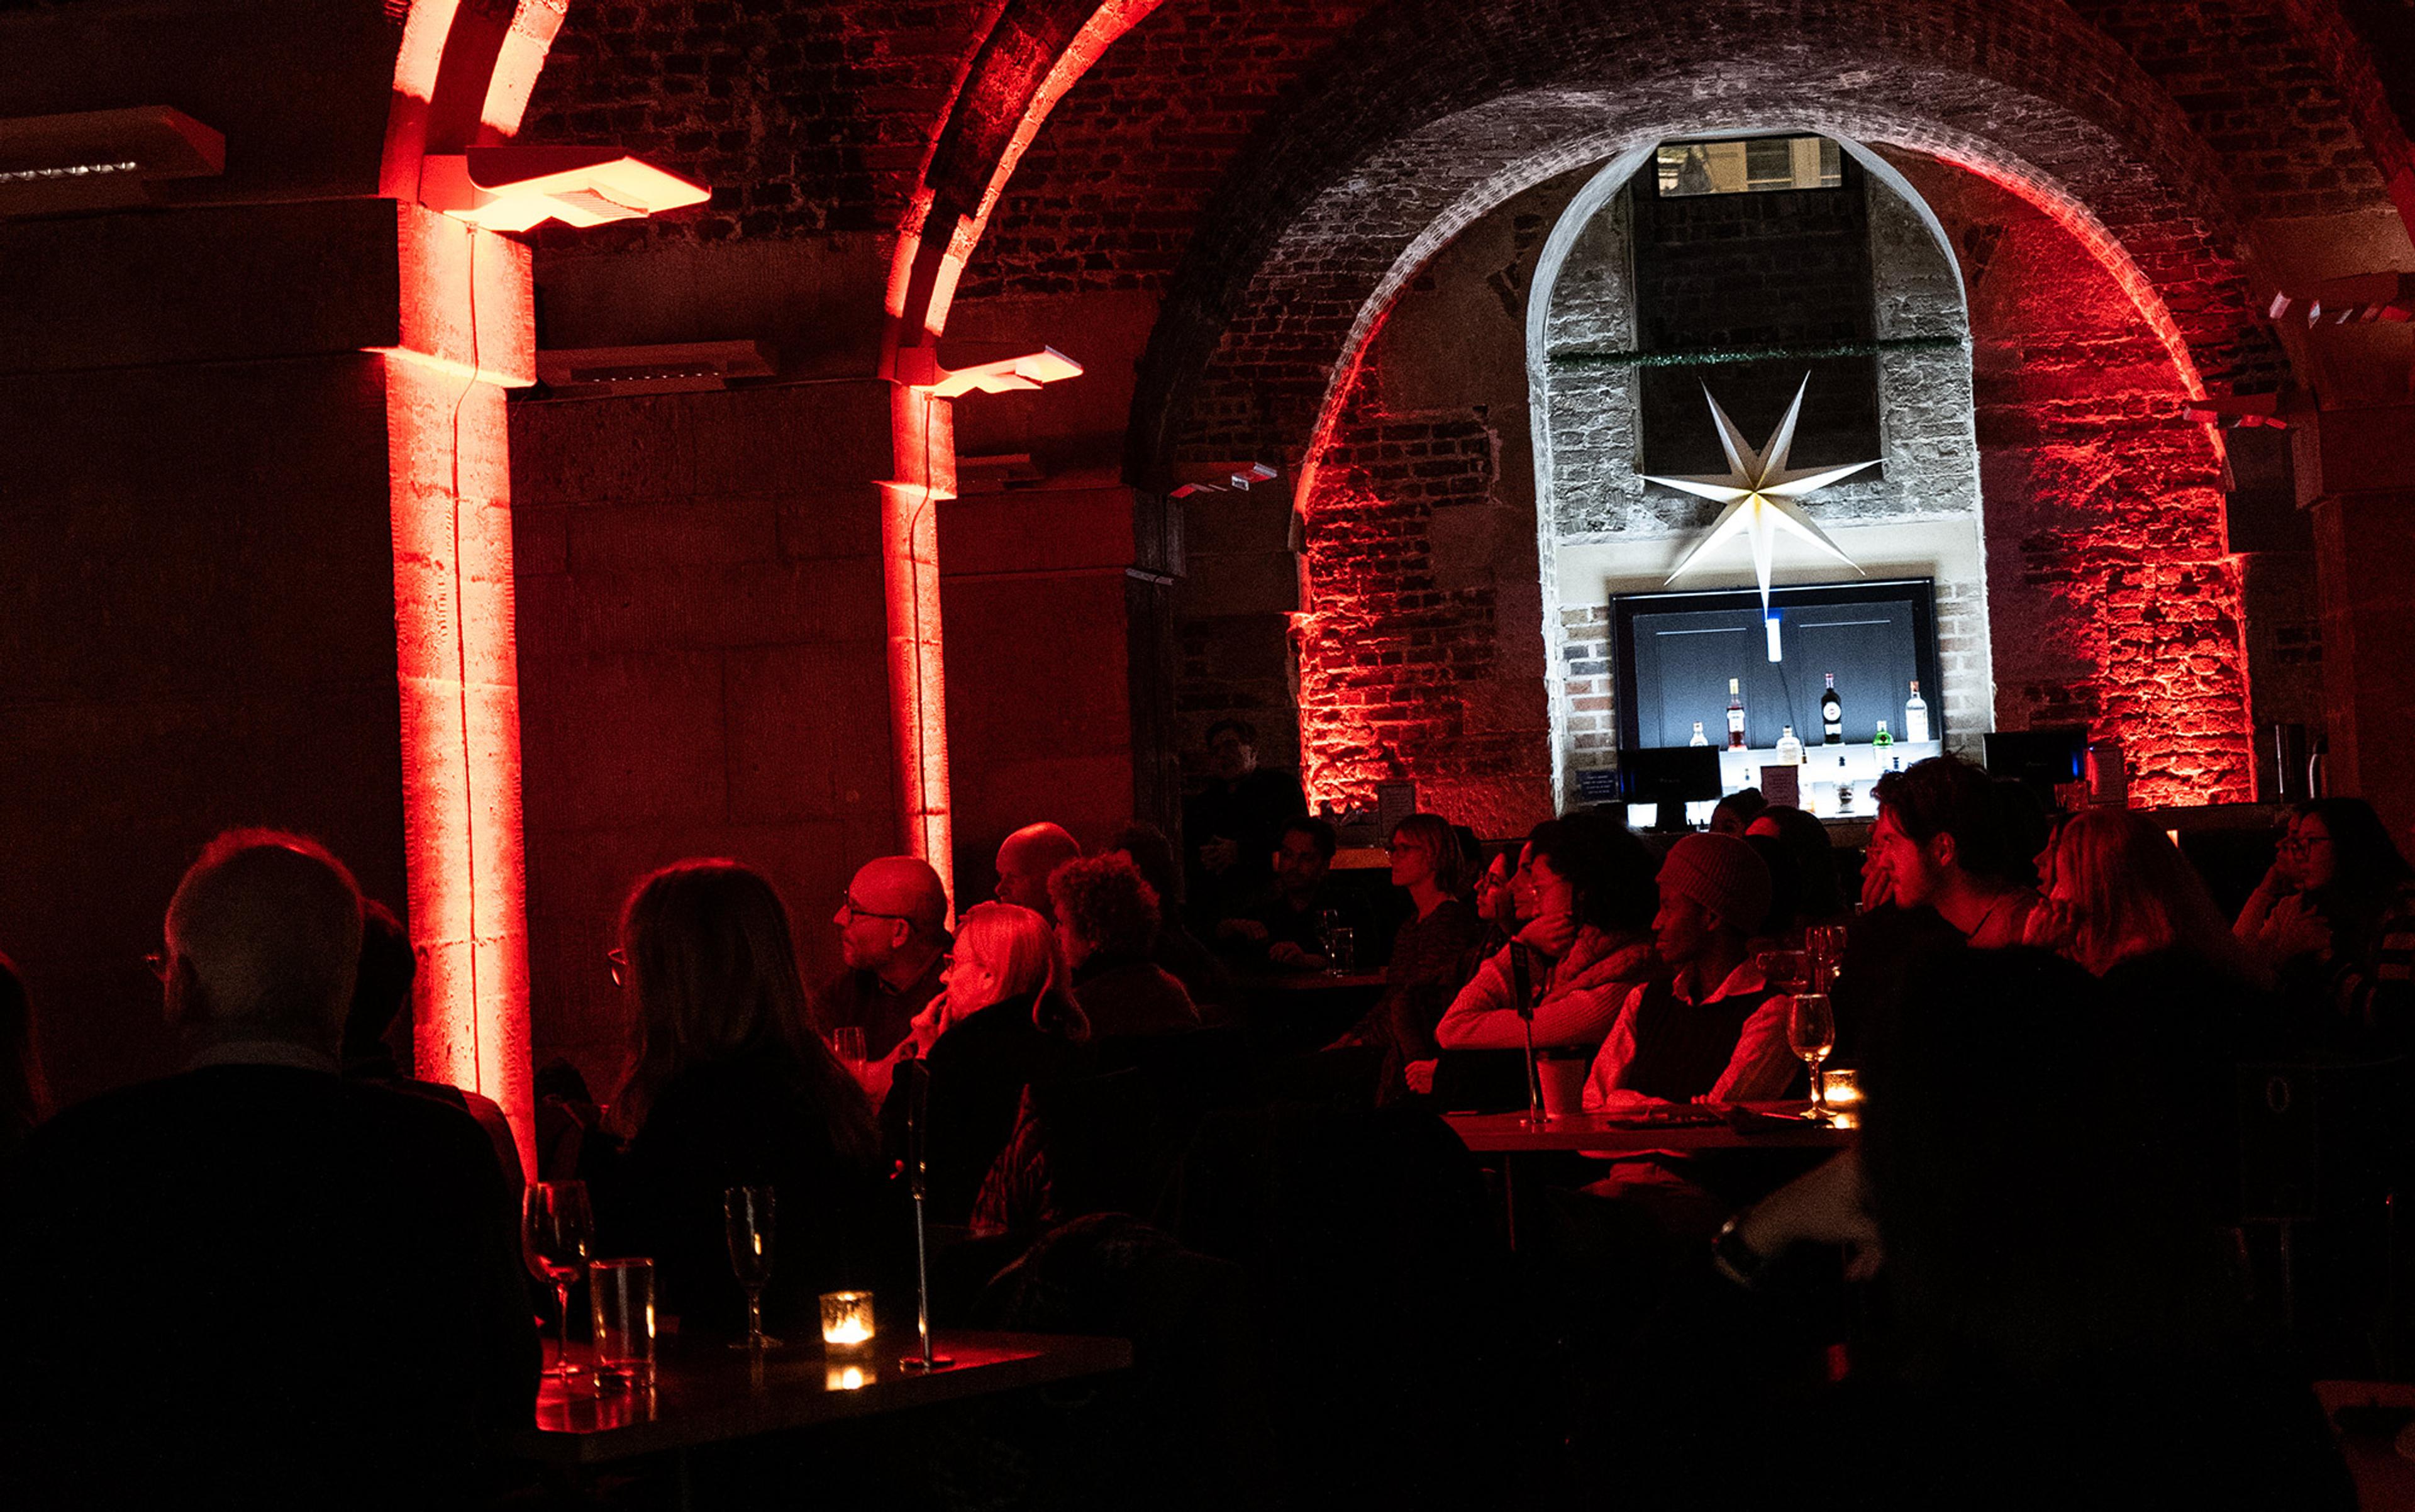 The audience looking towards the stage in The Crypt